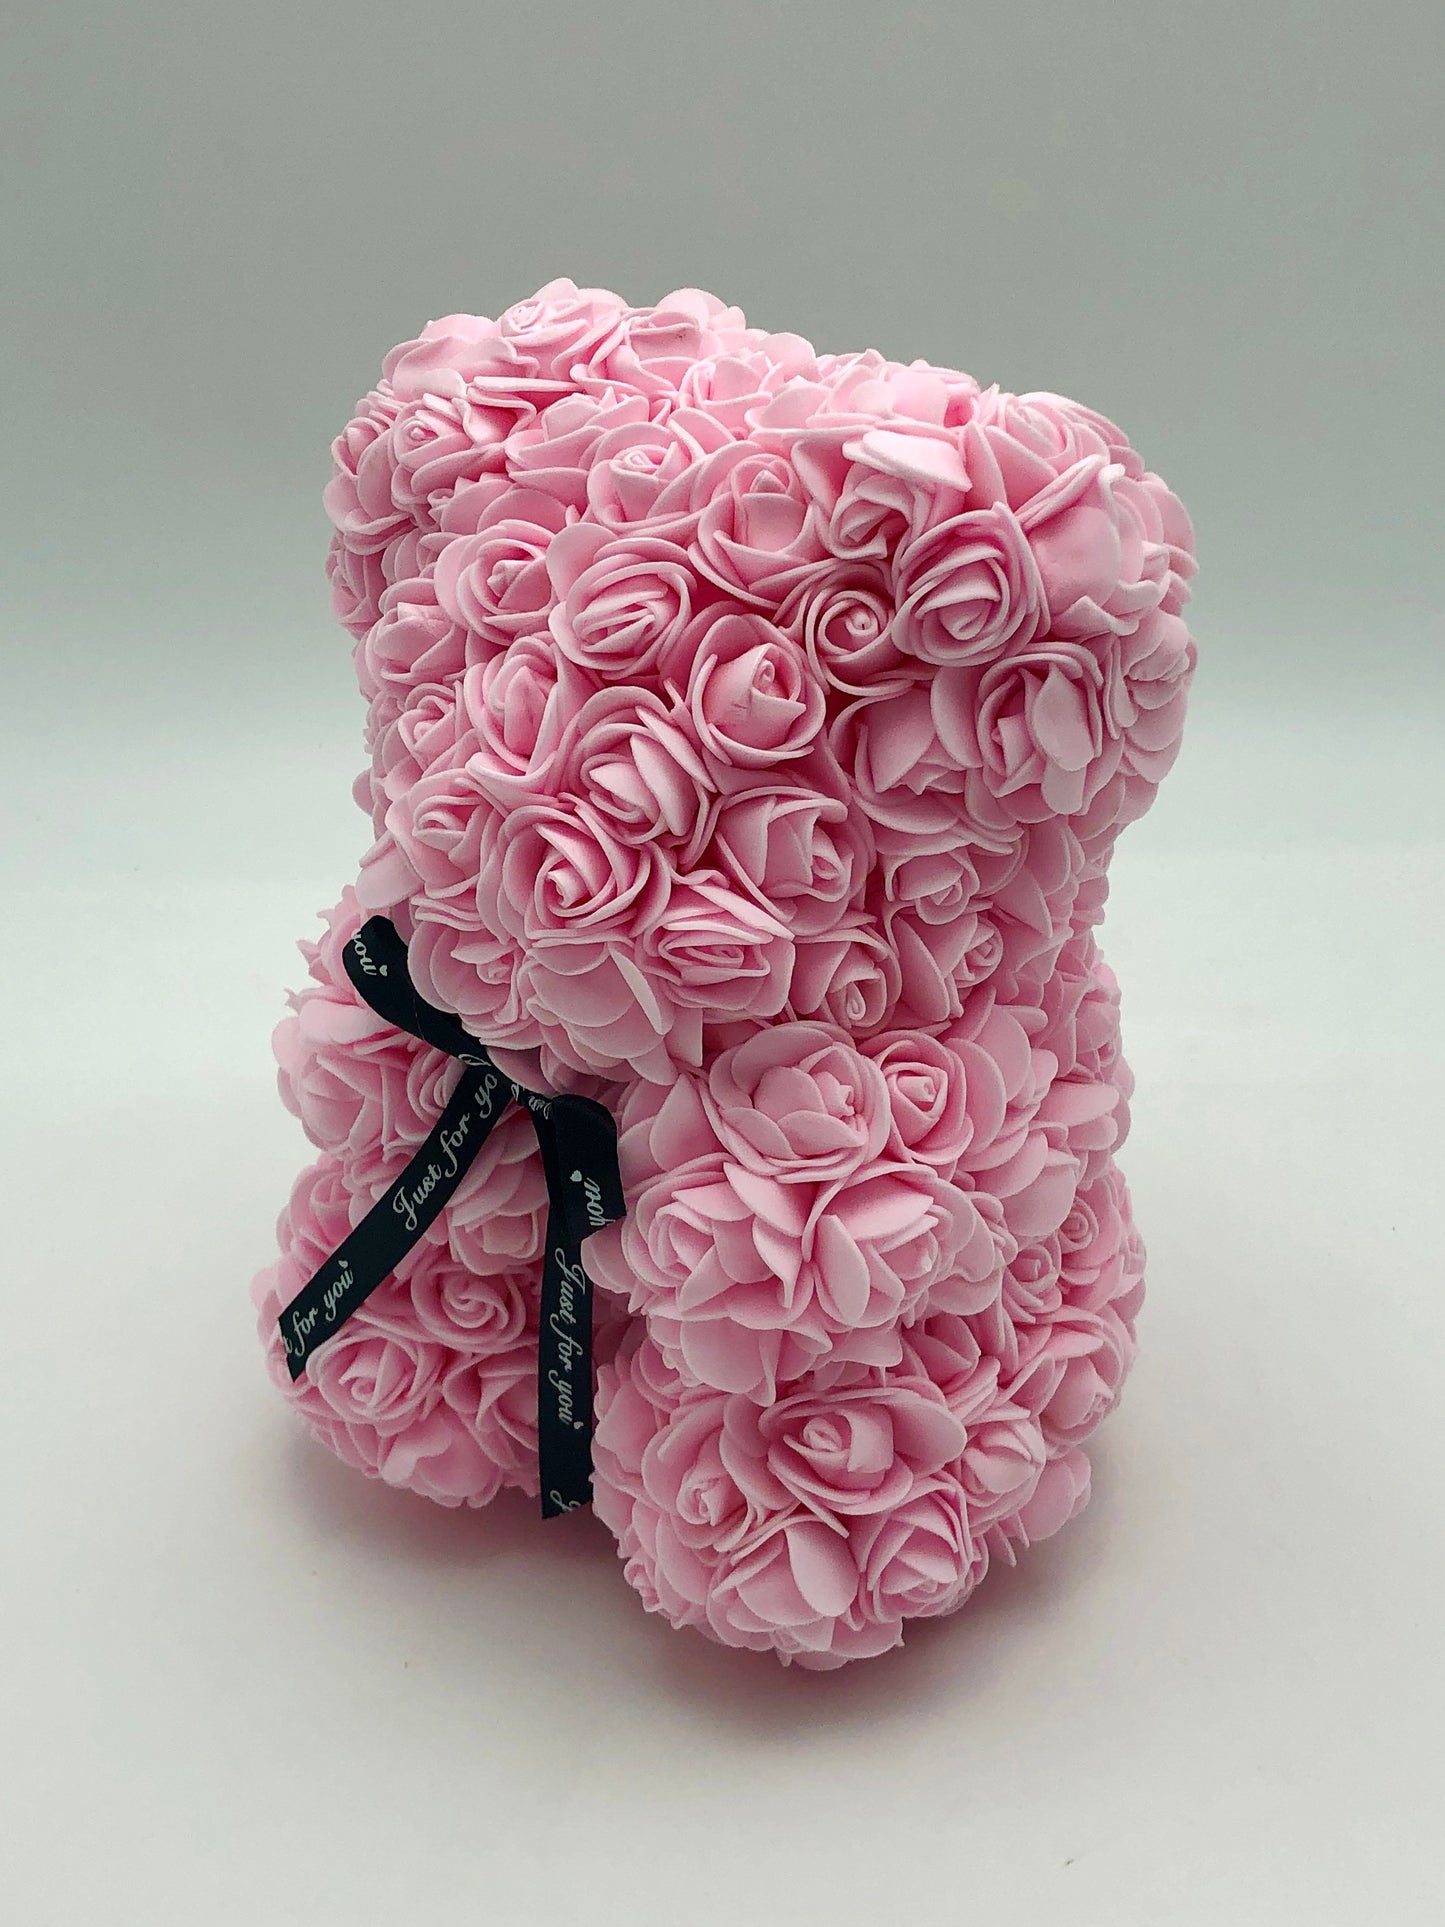 Rose Bear (25cm) with Free Gift Box